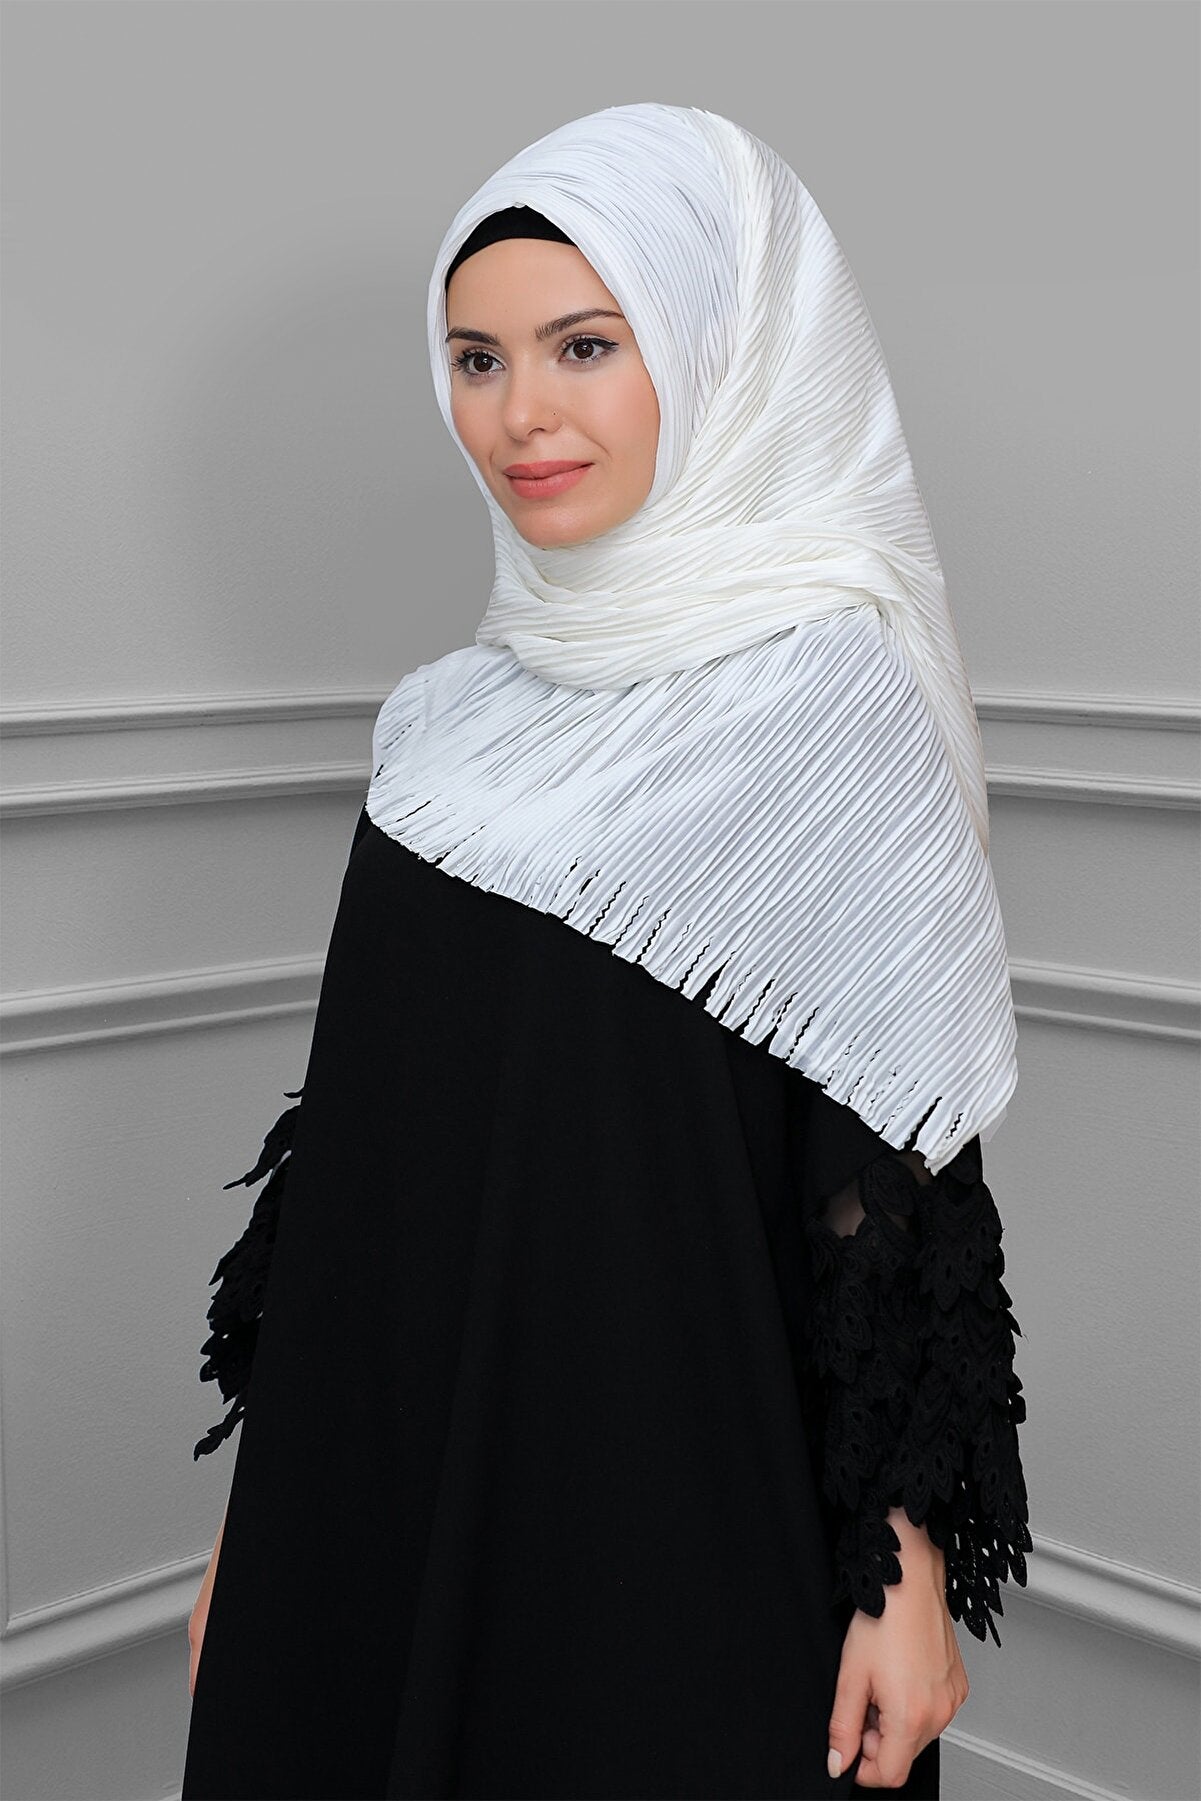 Off White Made Up Hijabs - Chaddors